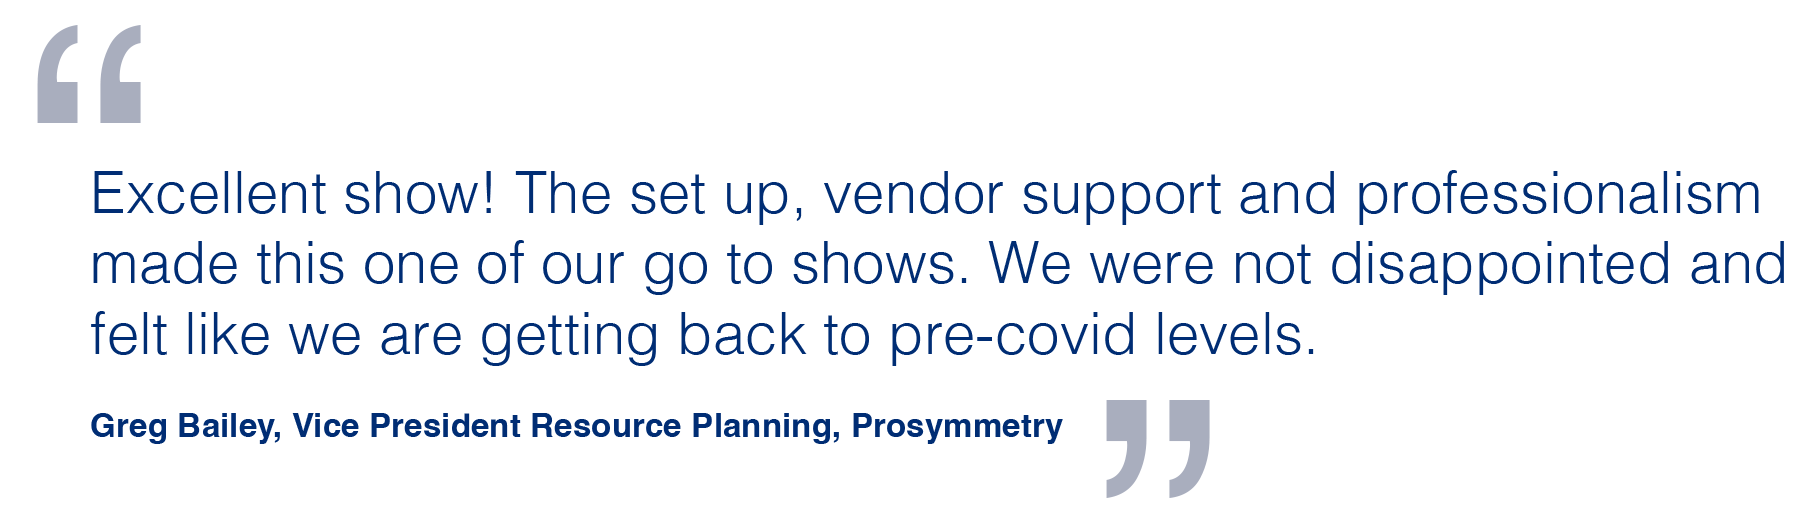 Excellent show! The set up, vendor support and professionalism made this one of our go to shows. We were not disappointed and felt like we are getting back to pre-covid levels. Greg Bailey, Vice President Resource Planning, Prosymmetry